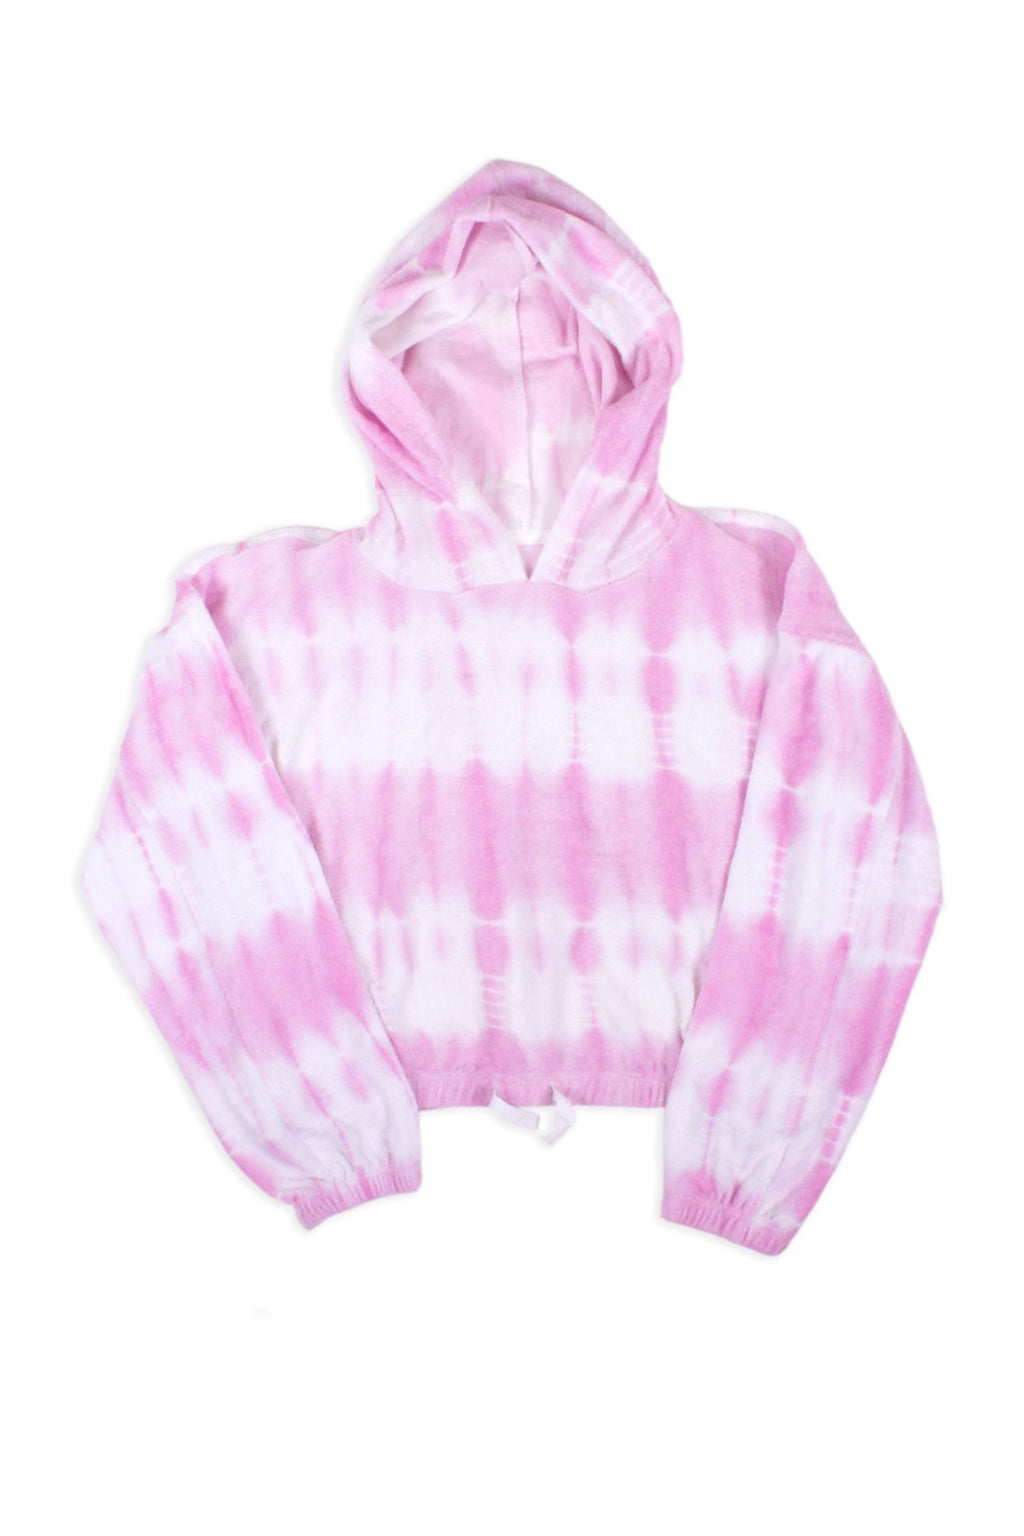 Shade Critters Terry Jogger Hoodie- Pink Tie Dye - Tadpole